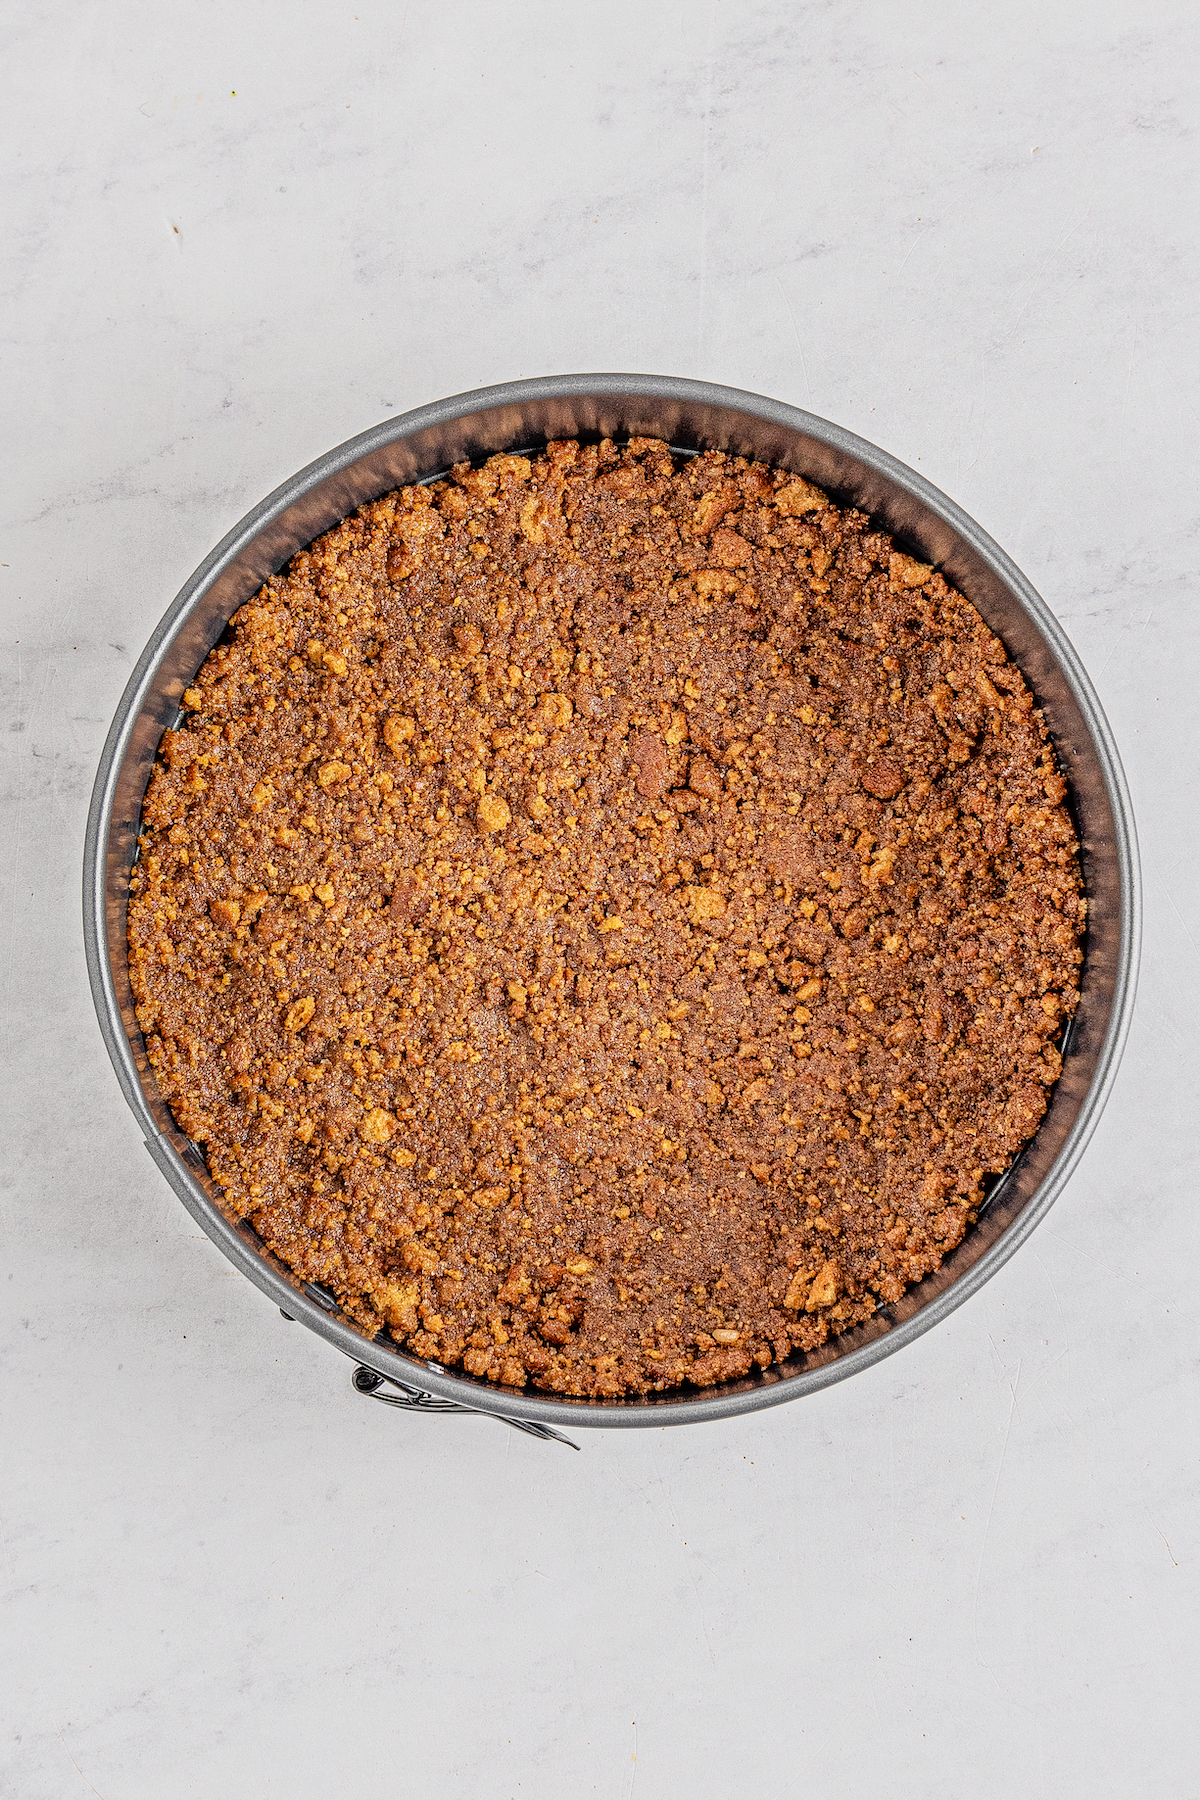 A springform pan with a crushed gingersnap crust pressed into the bottom.